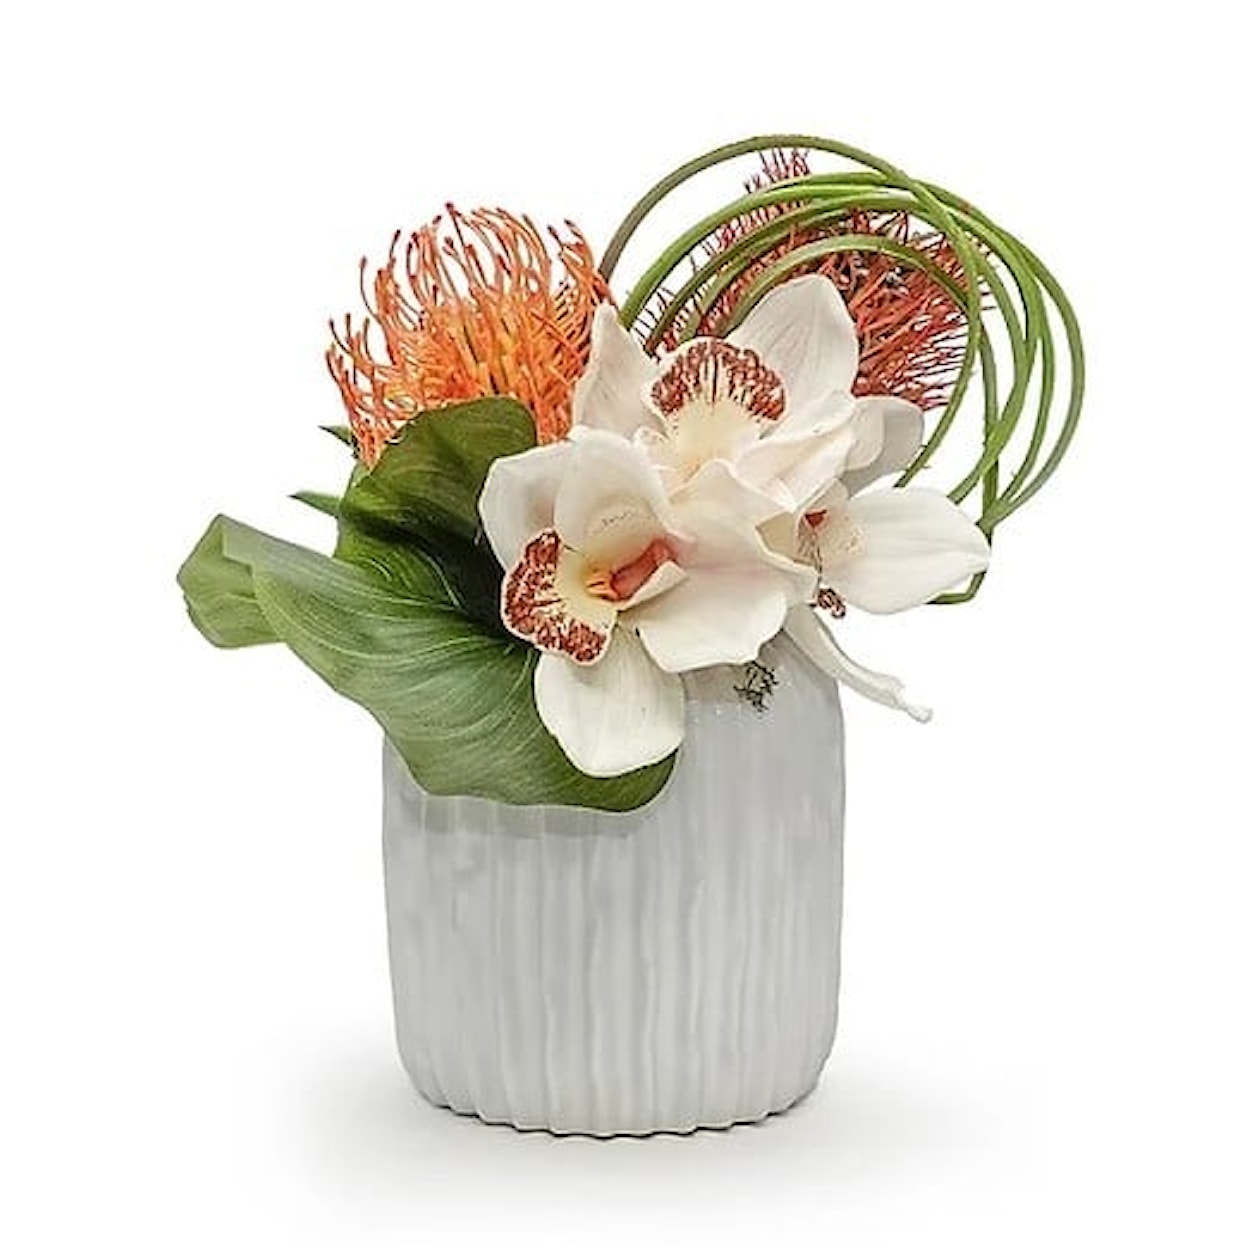 The Ivy Guild The Ivy Guild White Cymbidium/Protea in Haven Pot